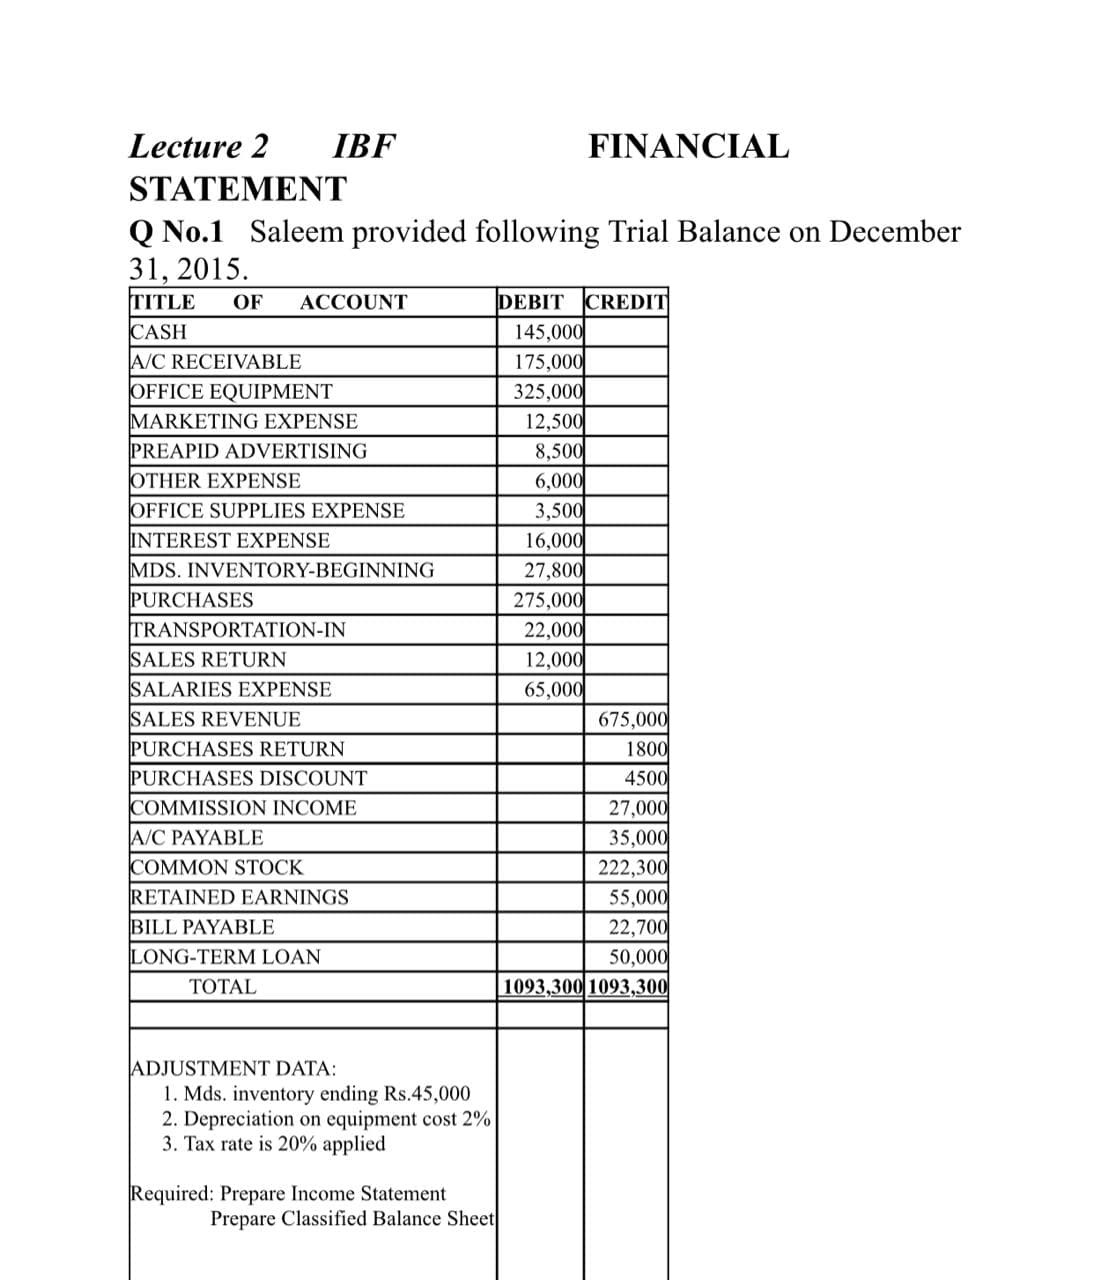 Lecture 2
IBF
FINANCIAL
STATEMENT
Q No.1 Saleem provided following Trial Balance on December
31, 2015.
TITLE
DEBIT
145,000
OF
ACCOUNT
CREDIT
CASH
A/C RECEIVABLE
175,000
325,000
12,500
8,500
6,000
3,500
OFFICE EQUIPMENT
MARKETING EXPENSE
PREAPID ADVERTISING
OTHER EXPENSE
OFFICE SUPPLIES EXPENSE
INTEREST EXPENSE
MDS. INVENTORY-BEGINNING
PURCHASES
TRANSPORTATION-IN
SALES RETURN
SALARIES EXPENSE
16,000
27,800
275,000
22,000
12,000
65,000
SALES REVENUE
675,000
PURCHASES RETURN
PURCHASES DISCOUNT
COMMISSION INCOME
A/C PAYABLE
COMMON STOCK
RETAINED EARNINGS
BILL PAYABLE
LONG-TERM LOAN
1800
4500
27,000
35,000
222,300
55,000
22,700
50,000
TOTAL
1093,300 1093,300
ADJUSTMENT DATA:
1. Mds. inventory ending Rs.45,000
2. Depreciation on equipment cost 2%
3. Tax rate is 20% applied
Required: Prepare Income Statement
Prepare Classified Balance Sheet
